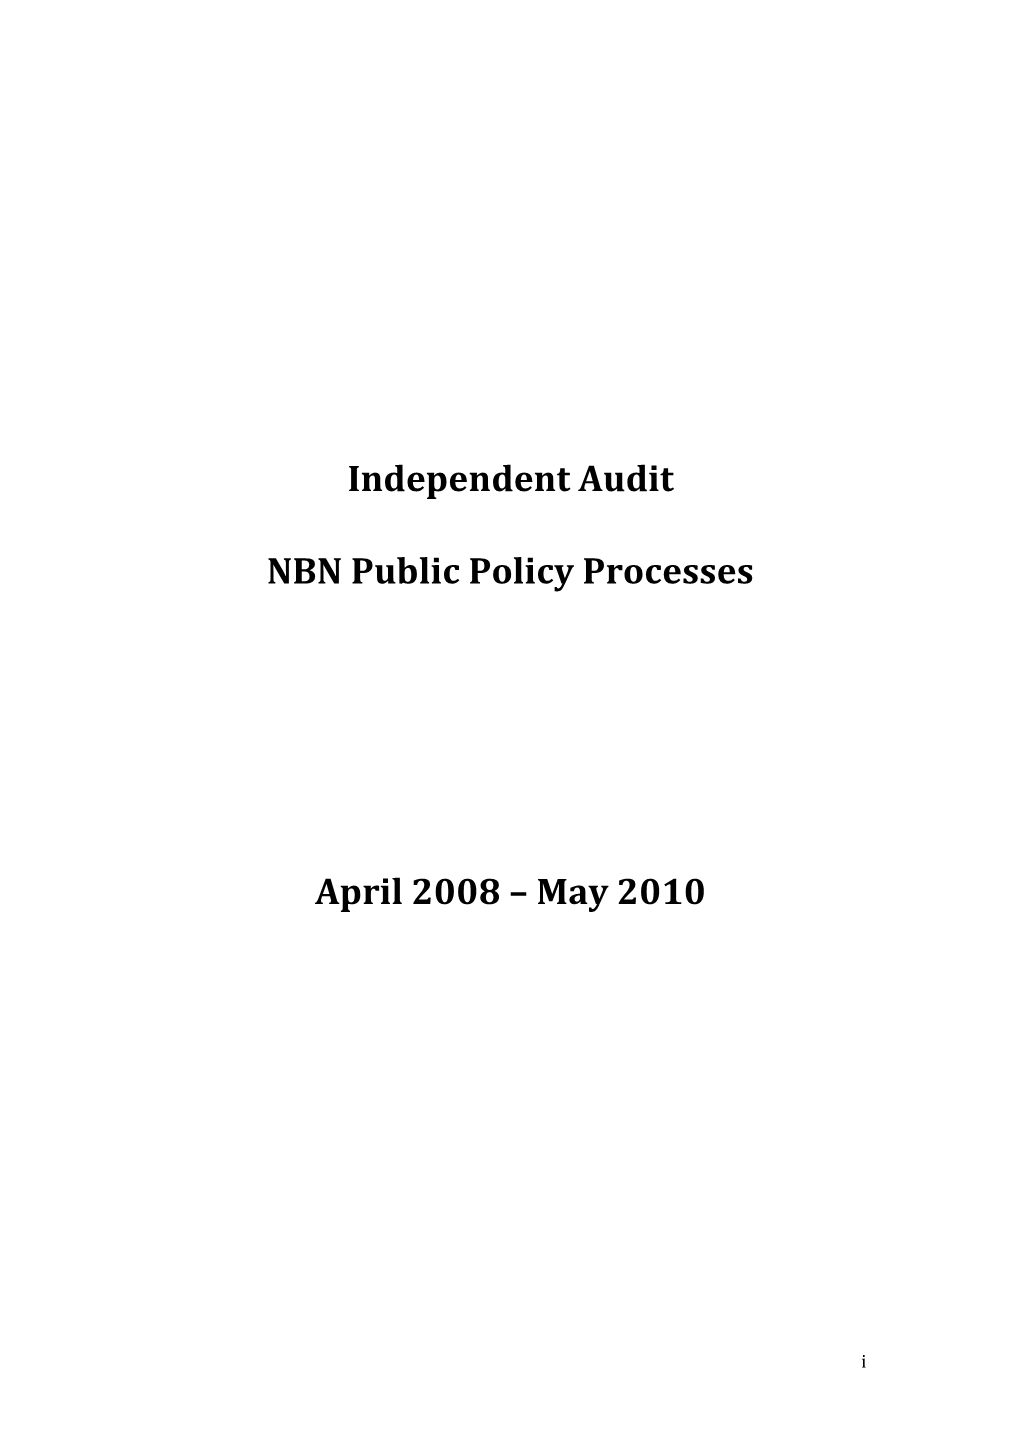 Independent Audit NBN Public Policy Processes April 2008 – May 2010